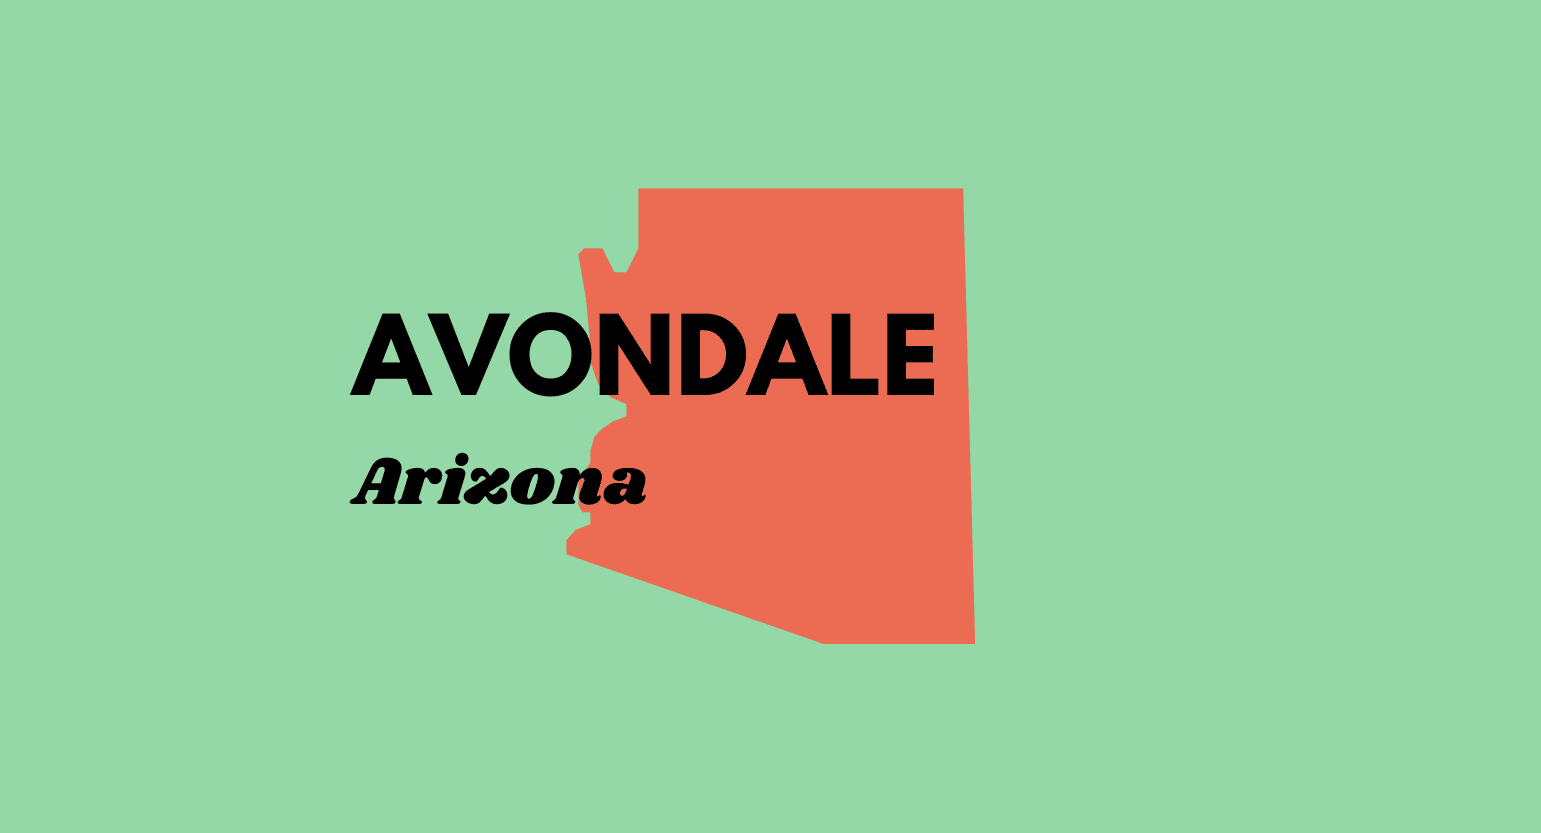 Looking for Kratom In Avondale? Here’s Where to Find the Best